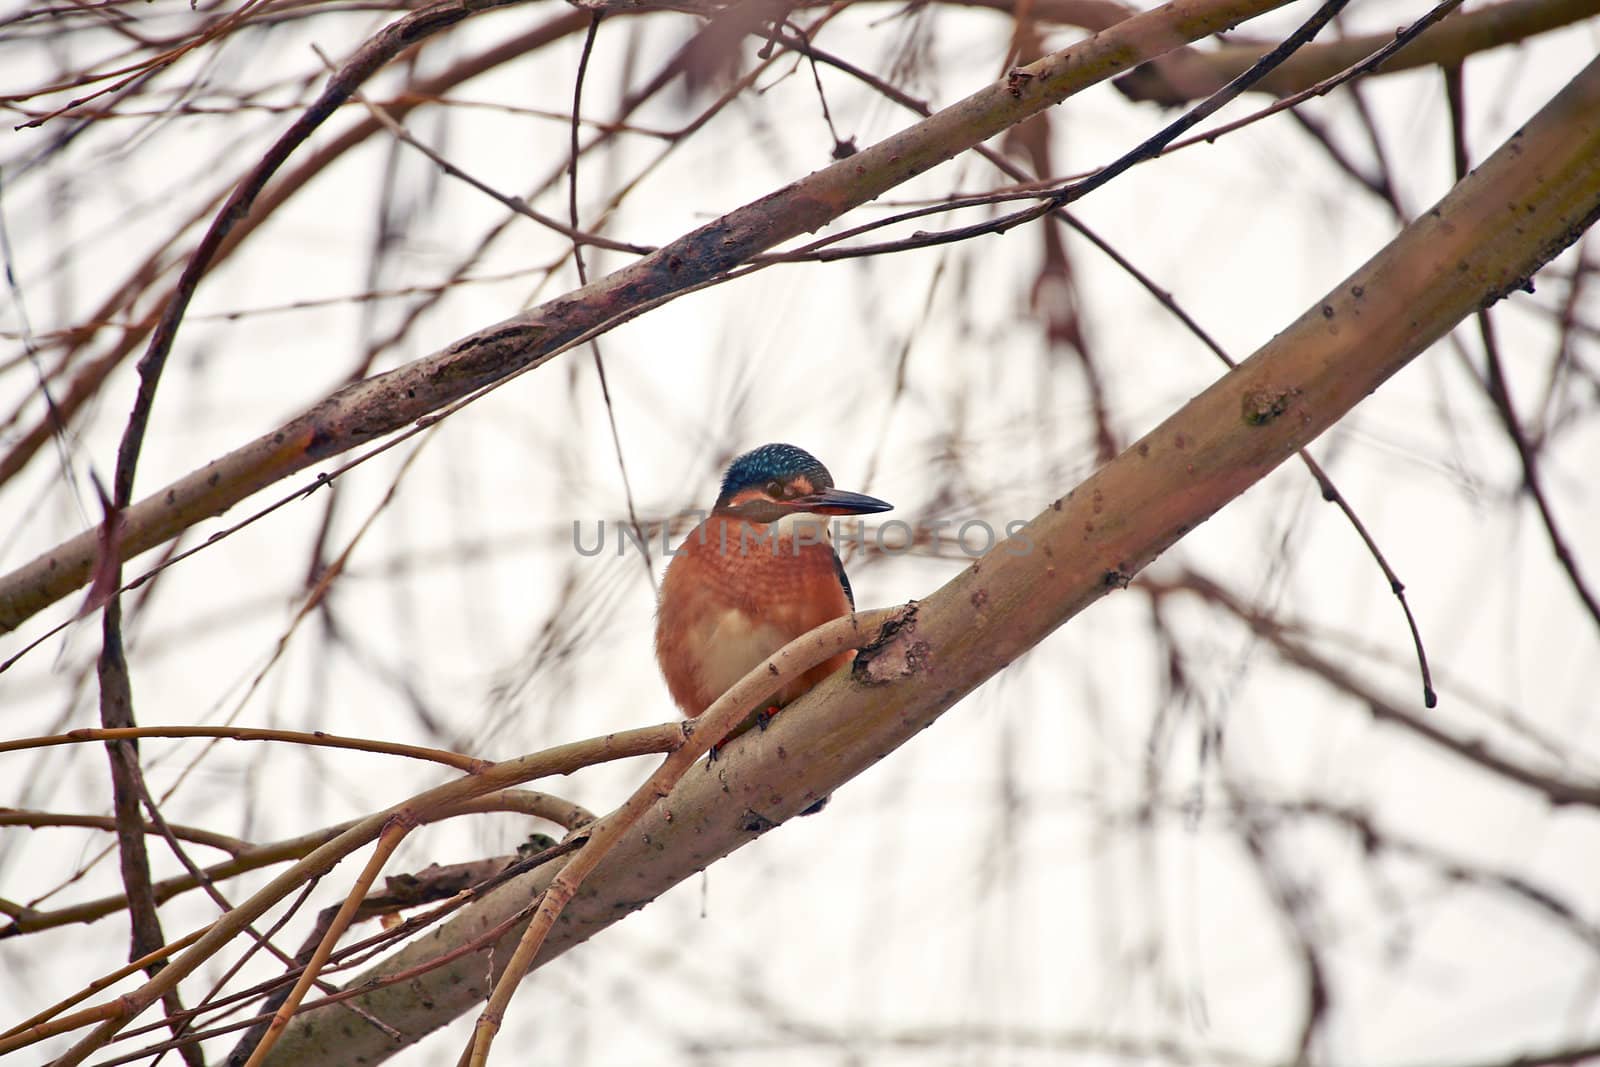 A common kingfisher sitting on a branch